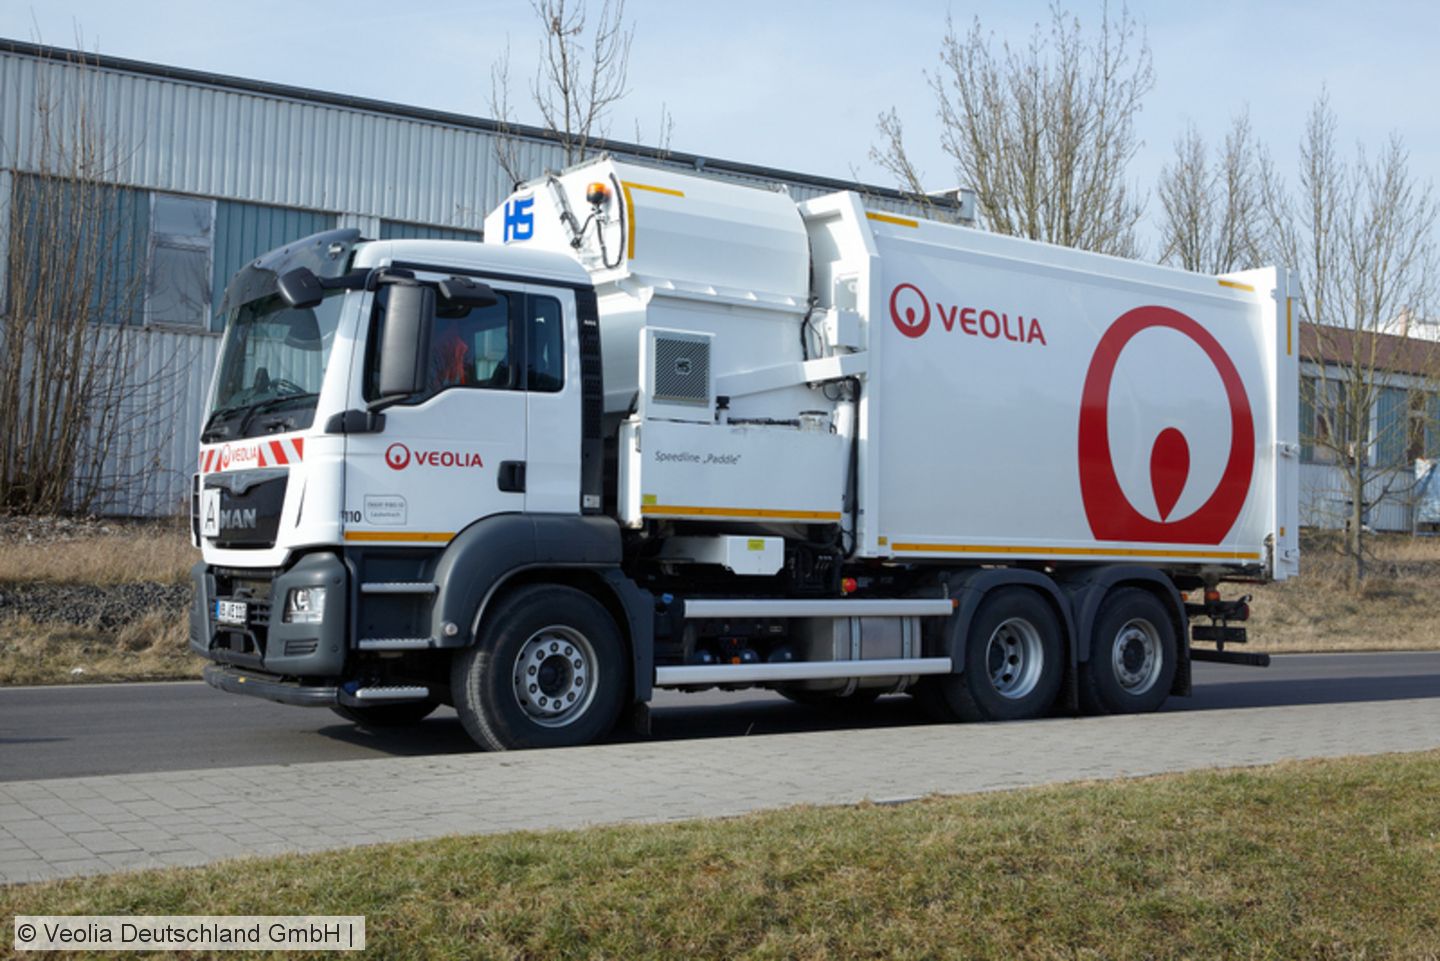 Veolia records 14 per cent decline in Q2 revenues from waste operations 